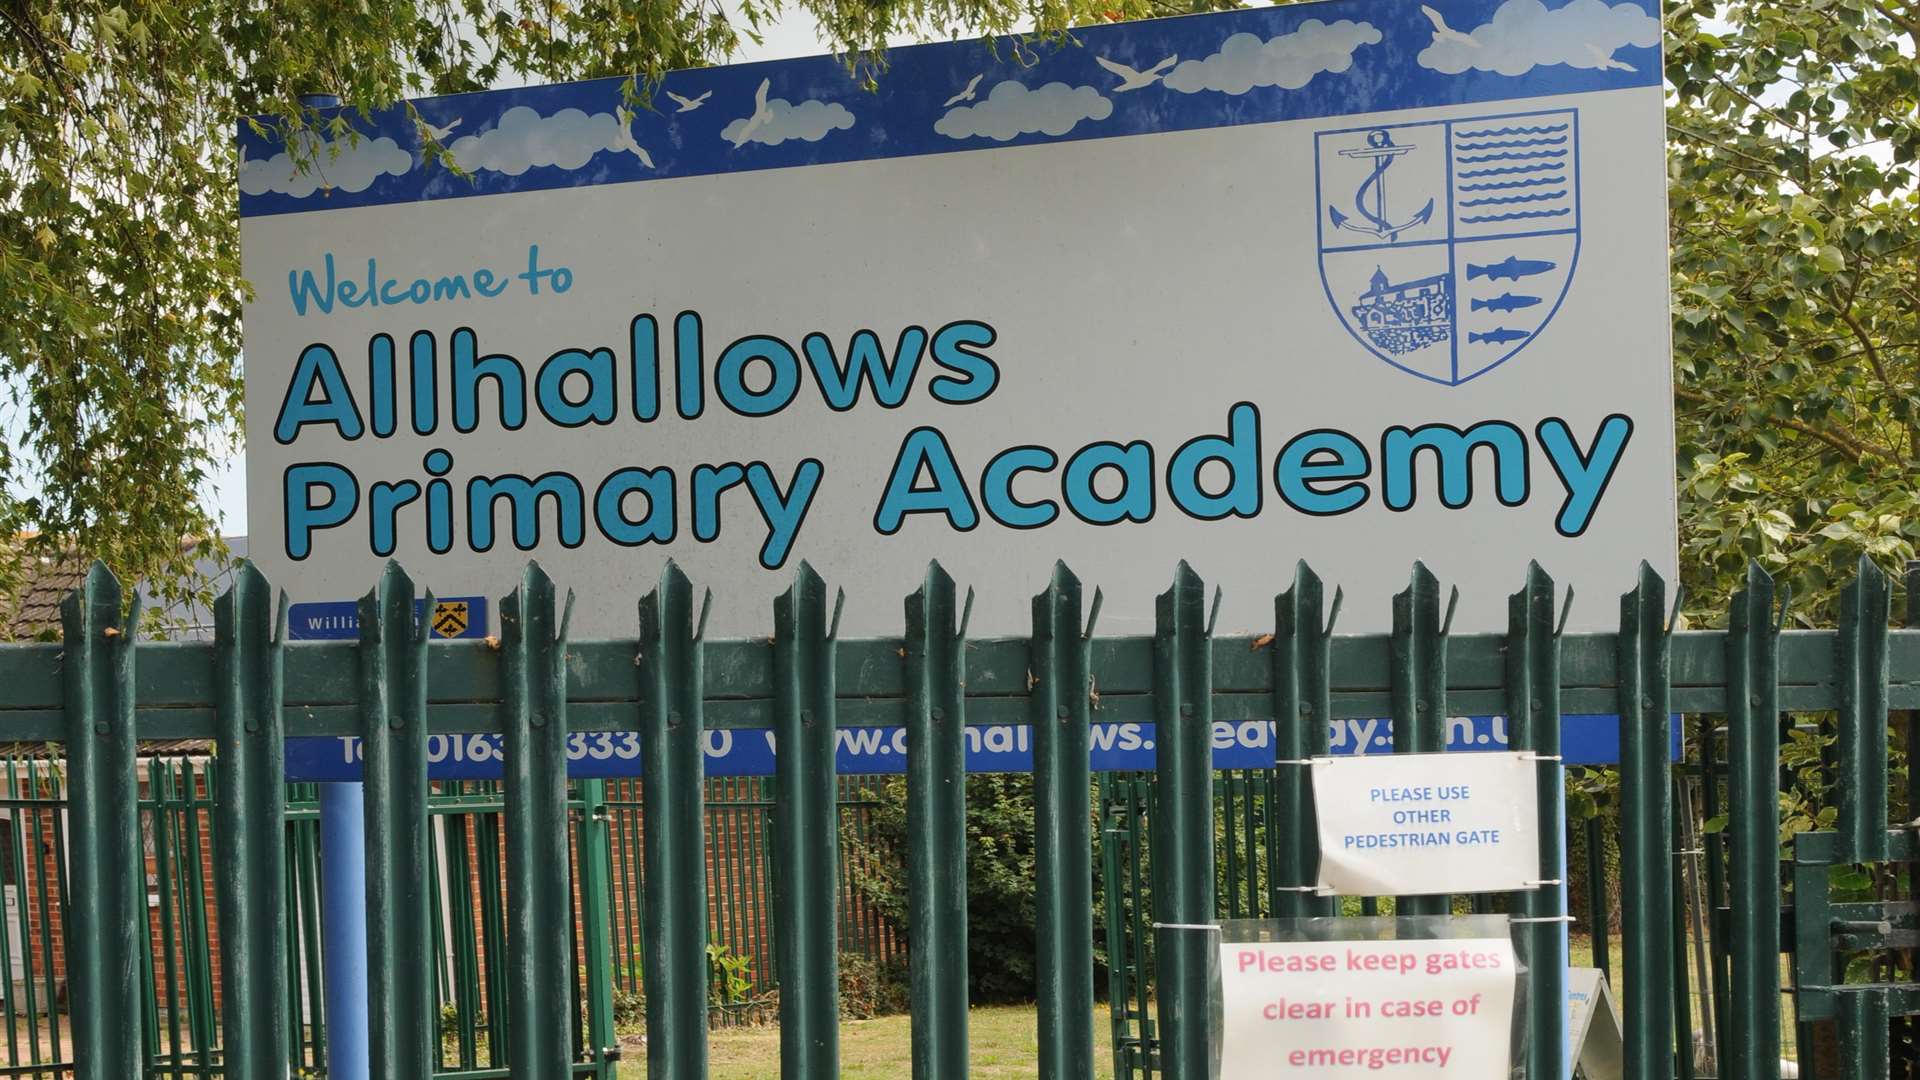 Pupils will be ferried to Allhallows Primary Academy